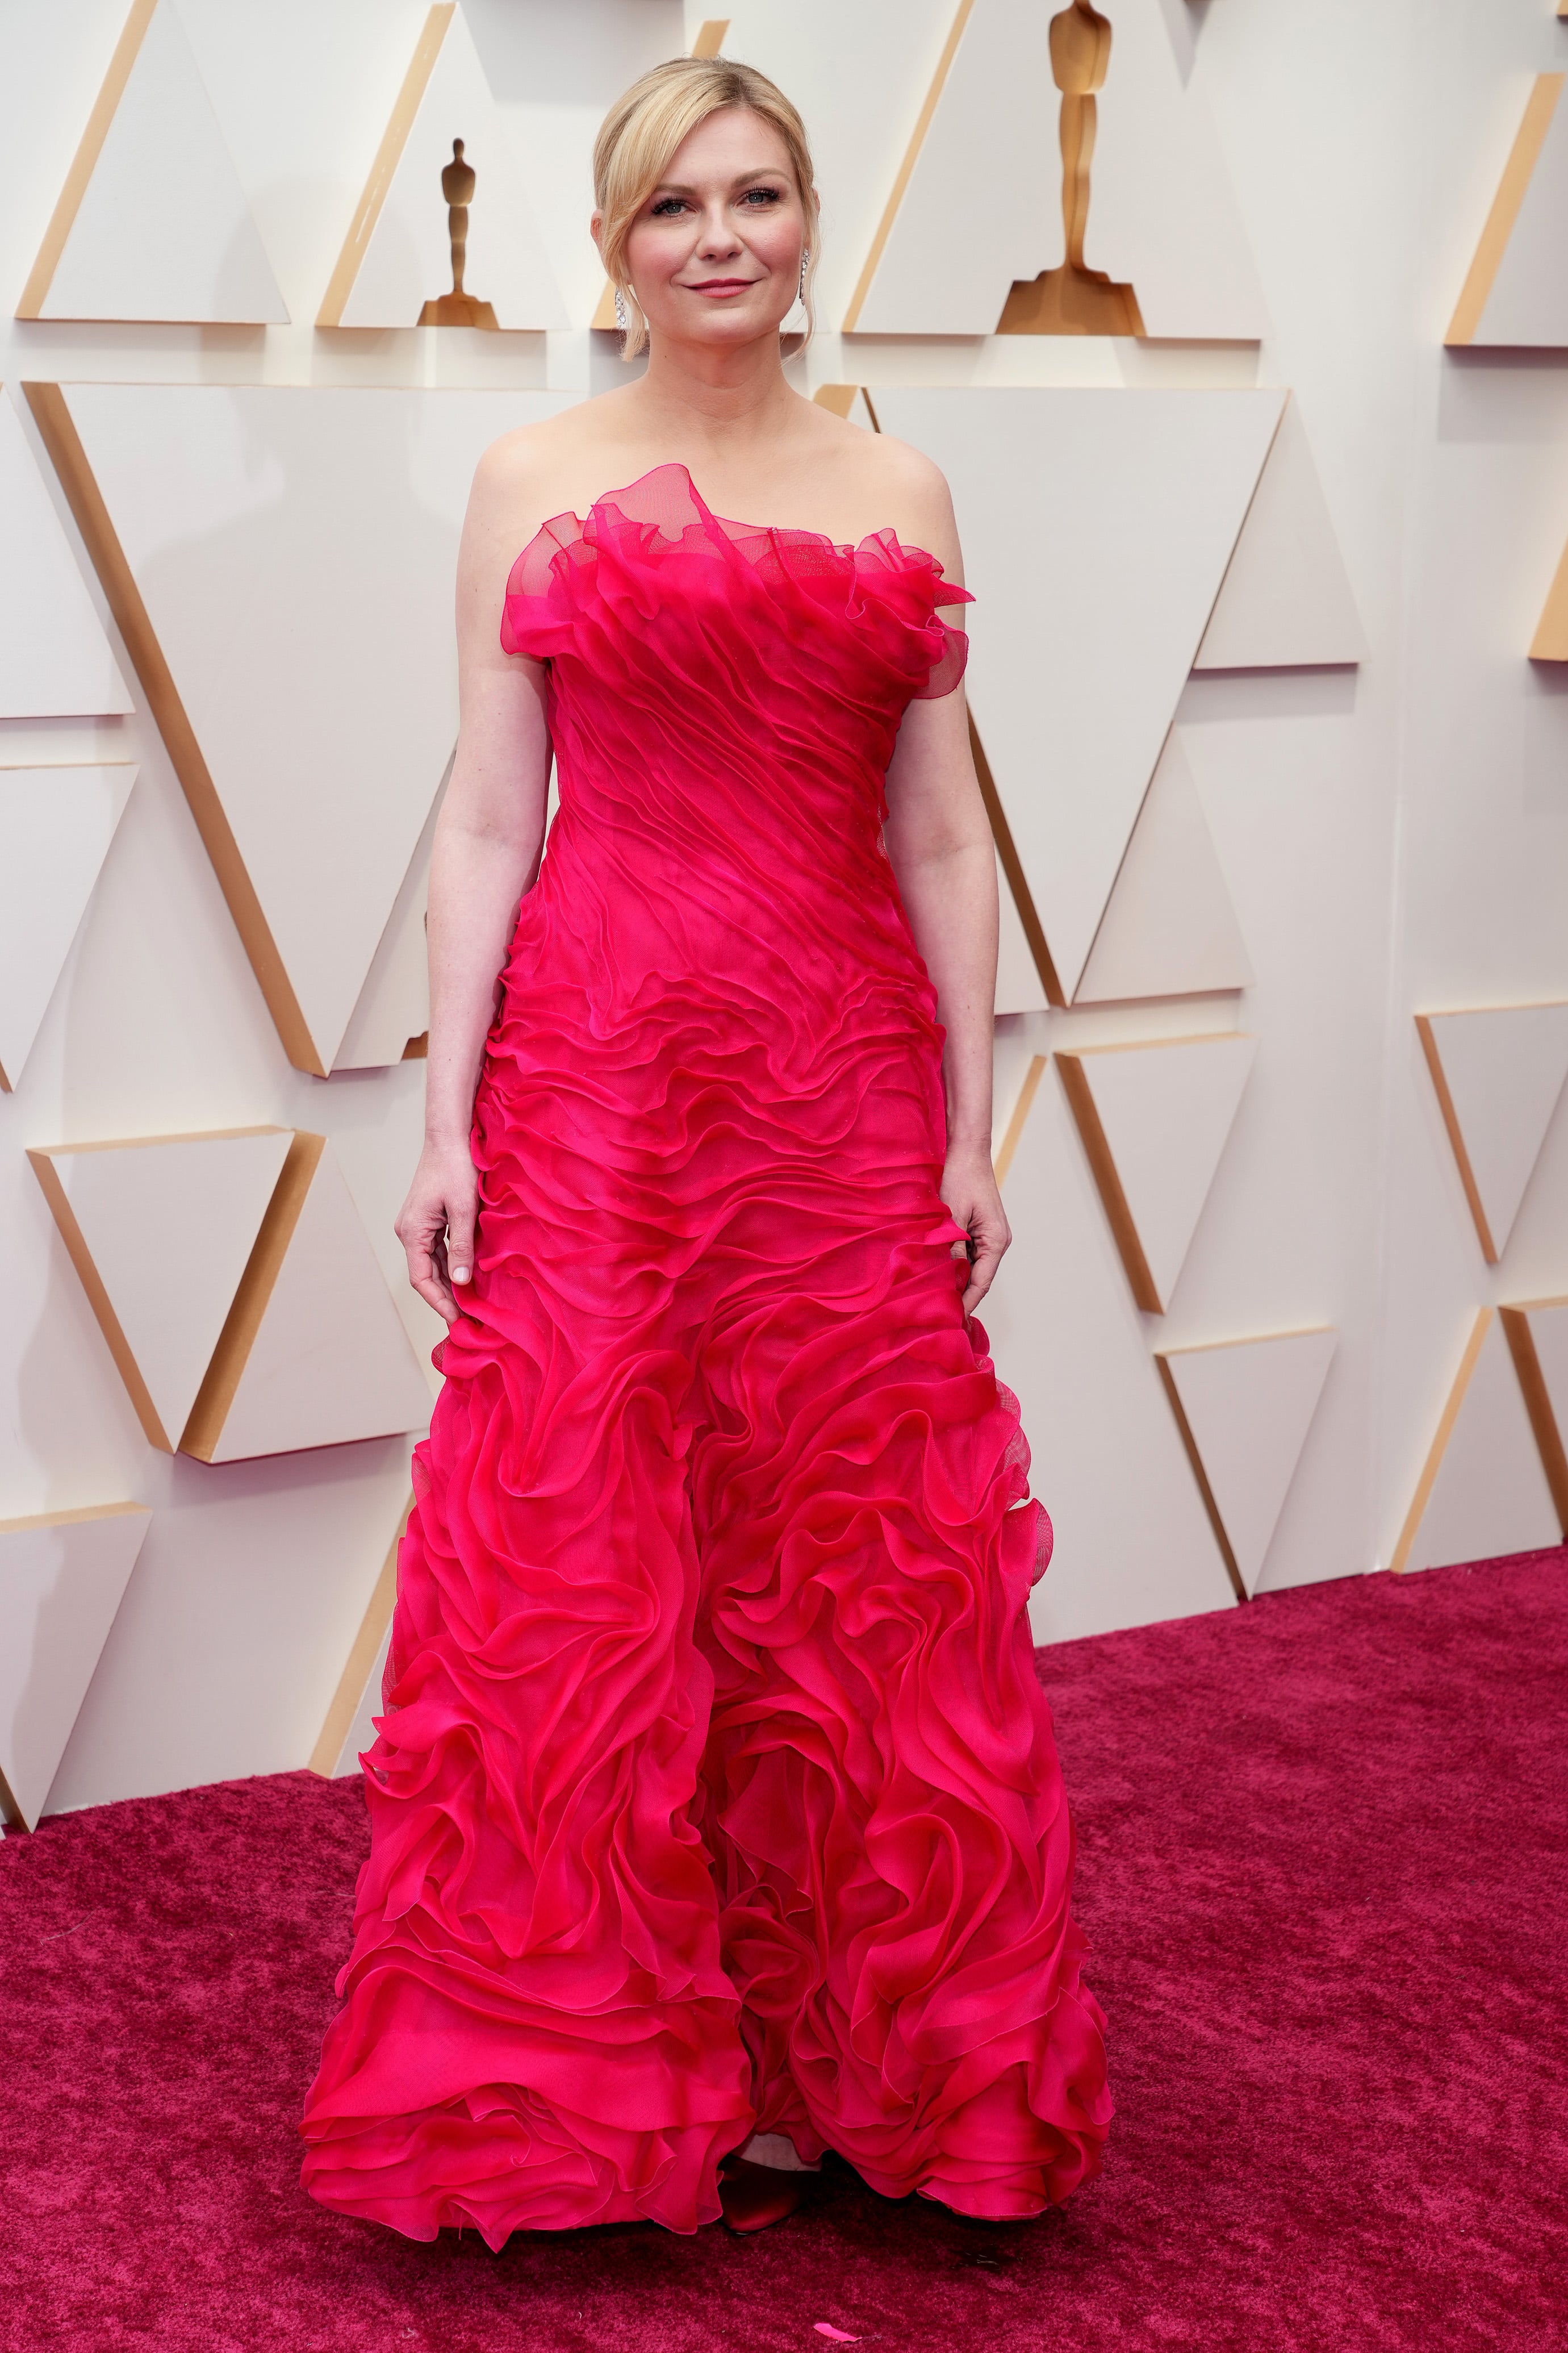 Tracee Ellis Ross Stuns in Red at 2022 Oscars: Red Carpet Photos – SheKnows